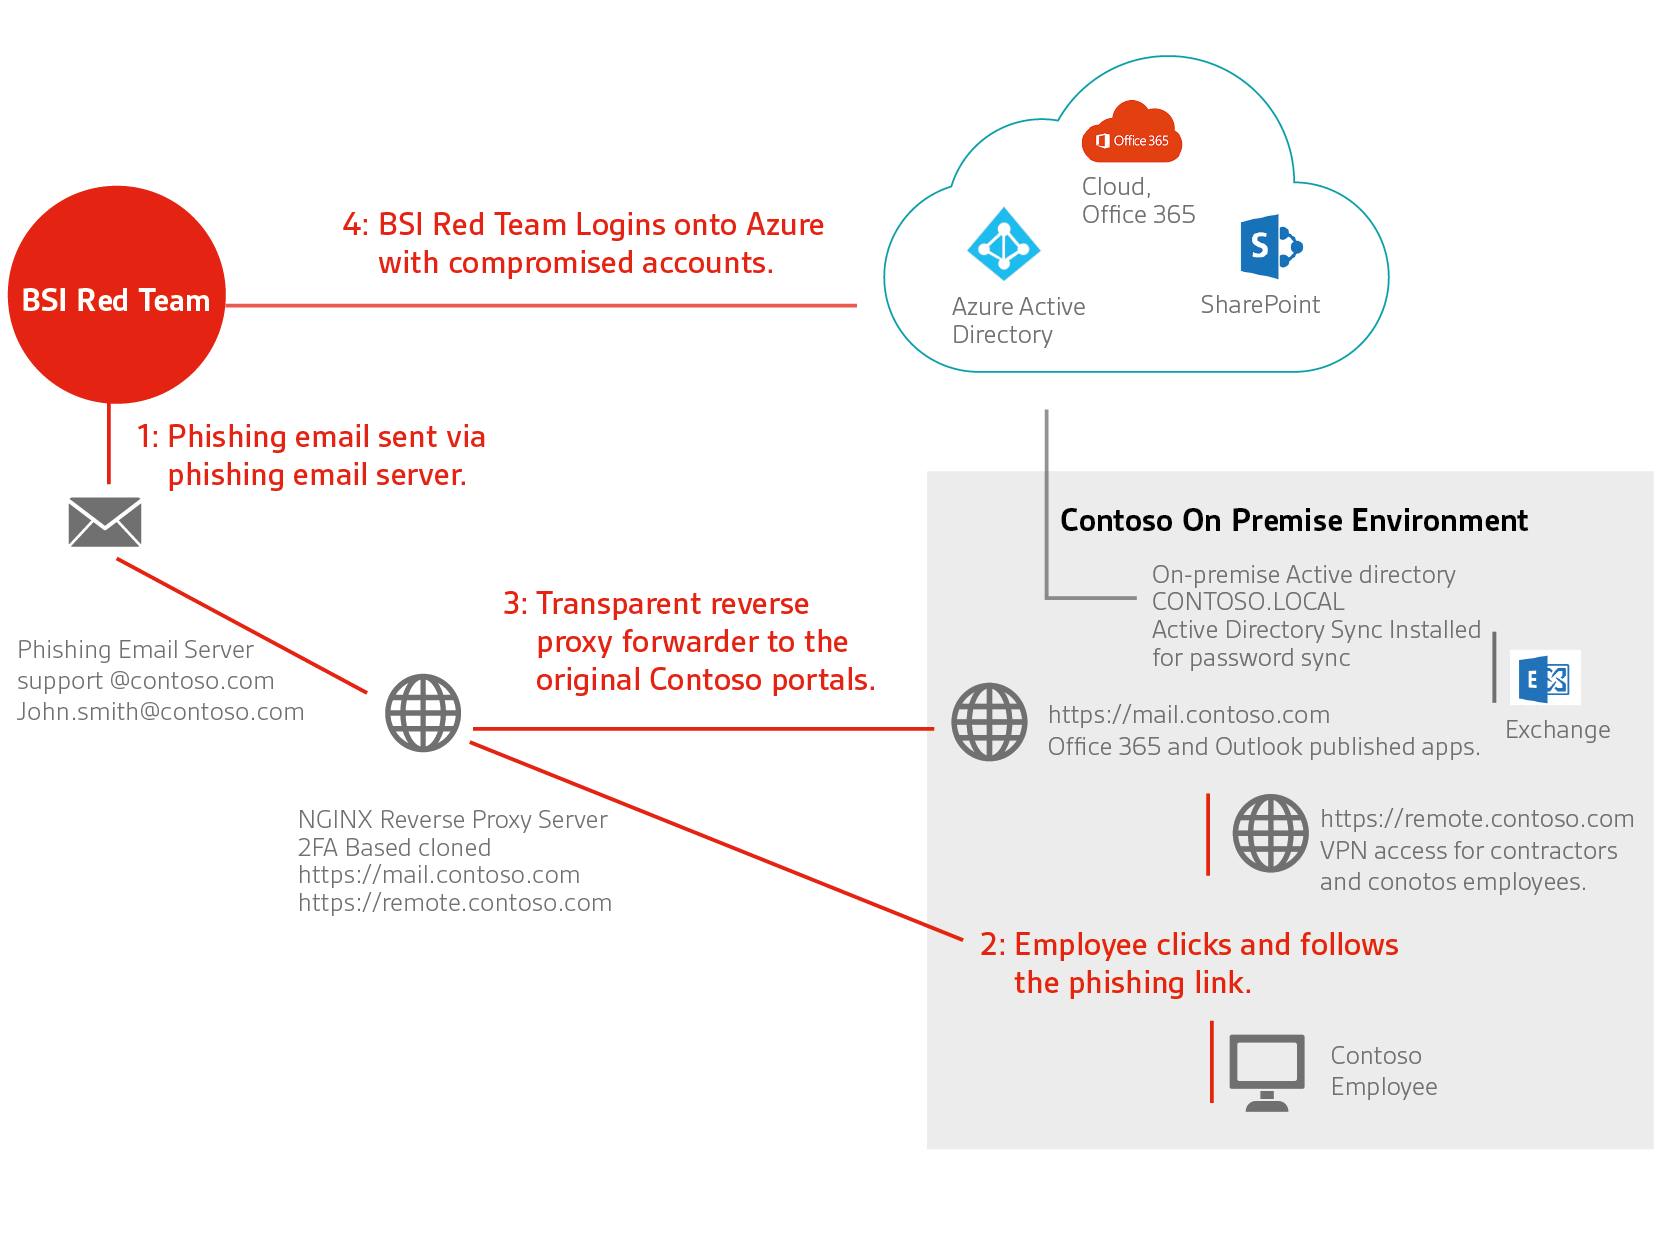 example of an attack scenario carried by the BSI red team against a financial institution to replicate the threat of a sophisticated attacker motivated by financial gains to identify if it is possible to breach their external perimeter and compromise both their cloud and on-premises environments.